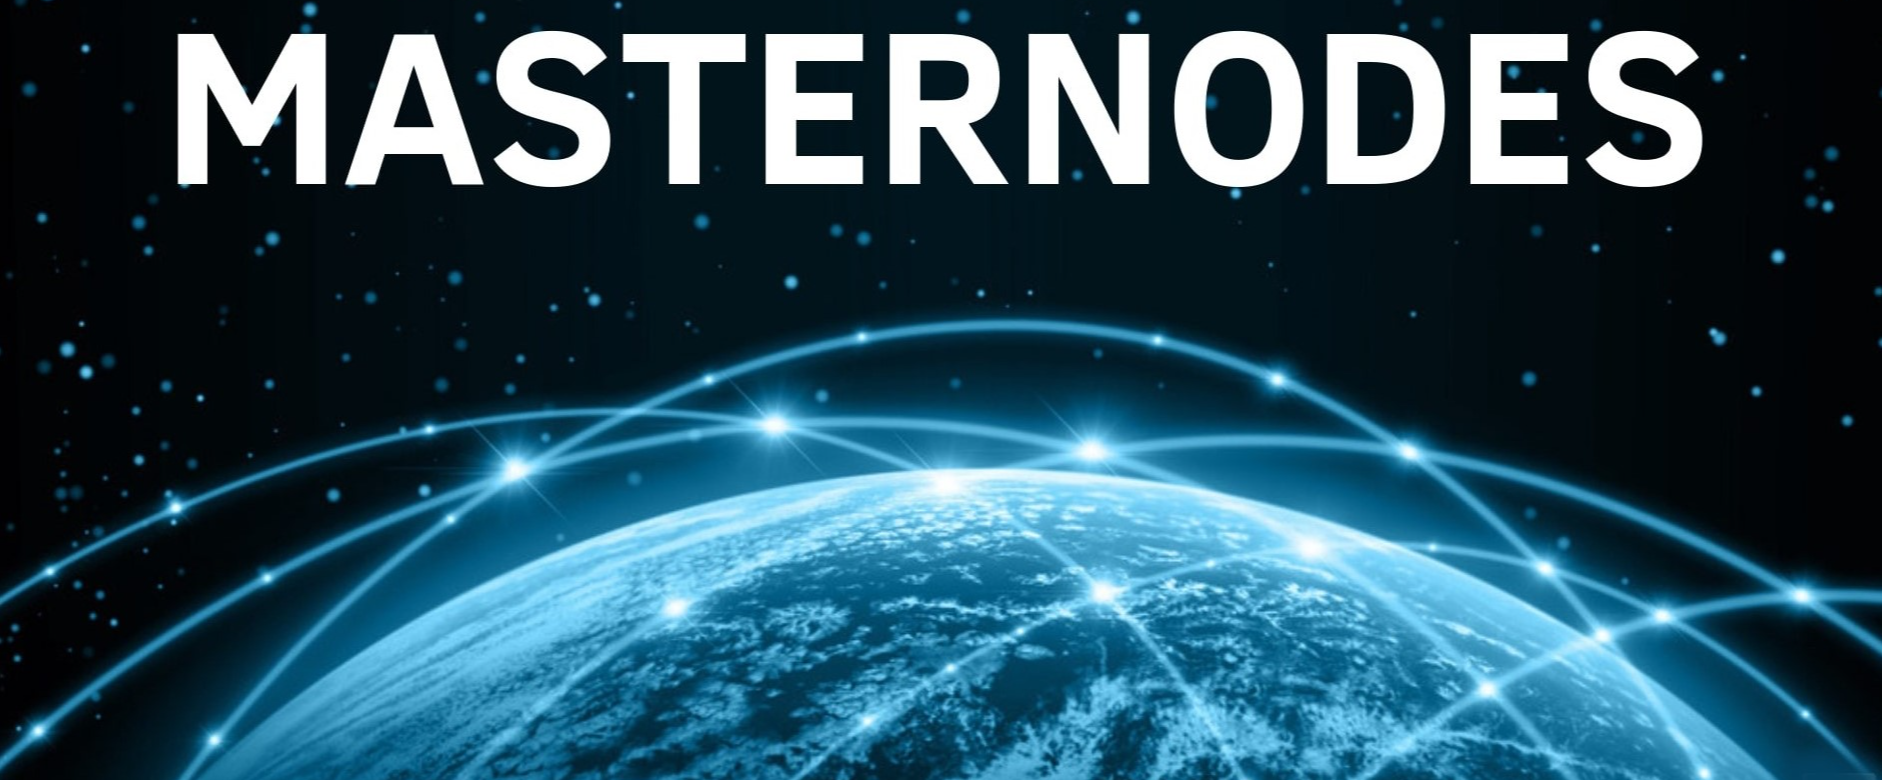 Masternodes in plain language. How to choose the right masternode